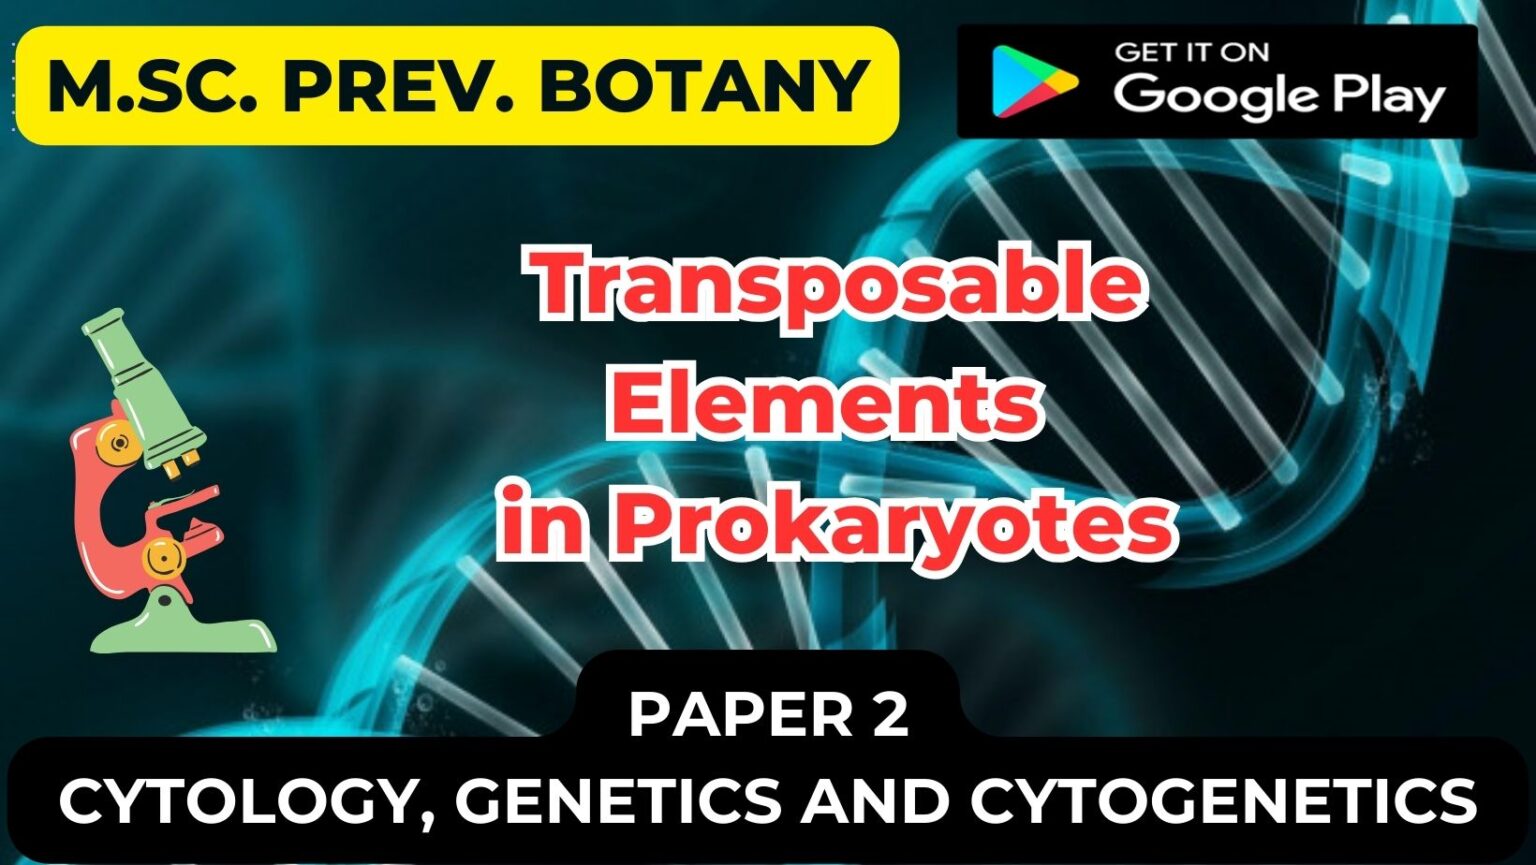 Transposable Elements in Prokaryotes